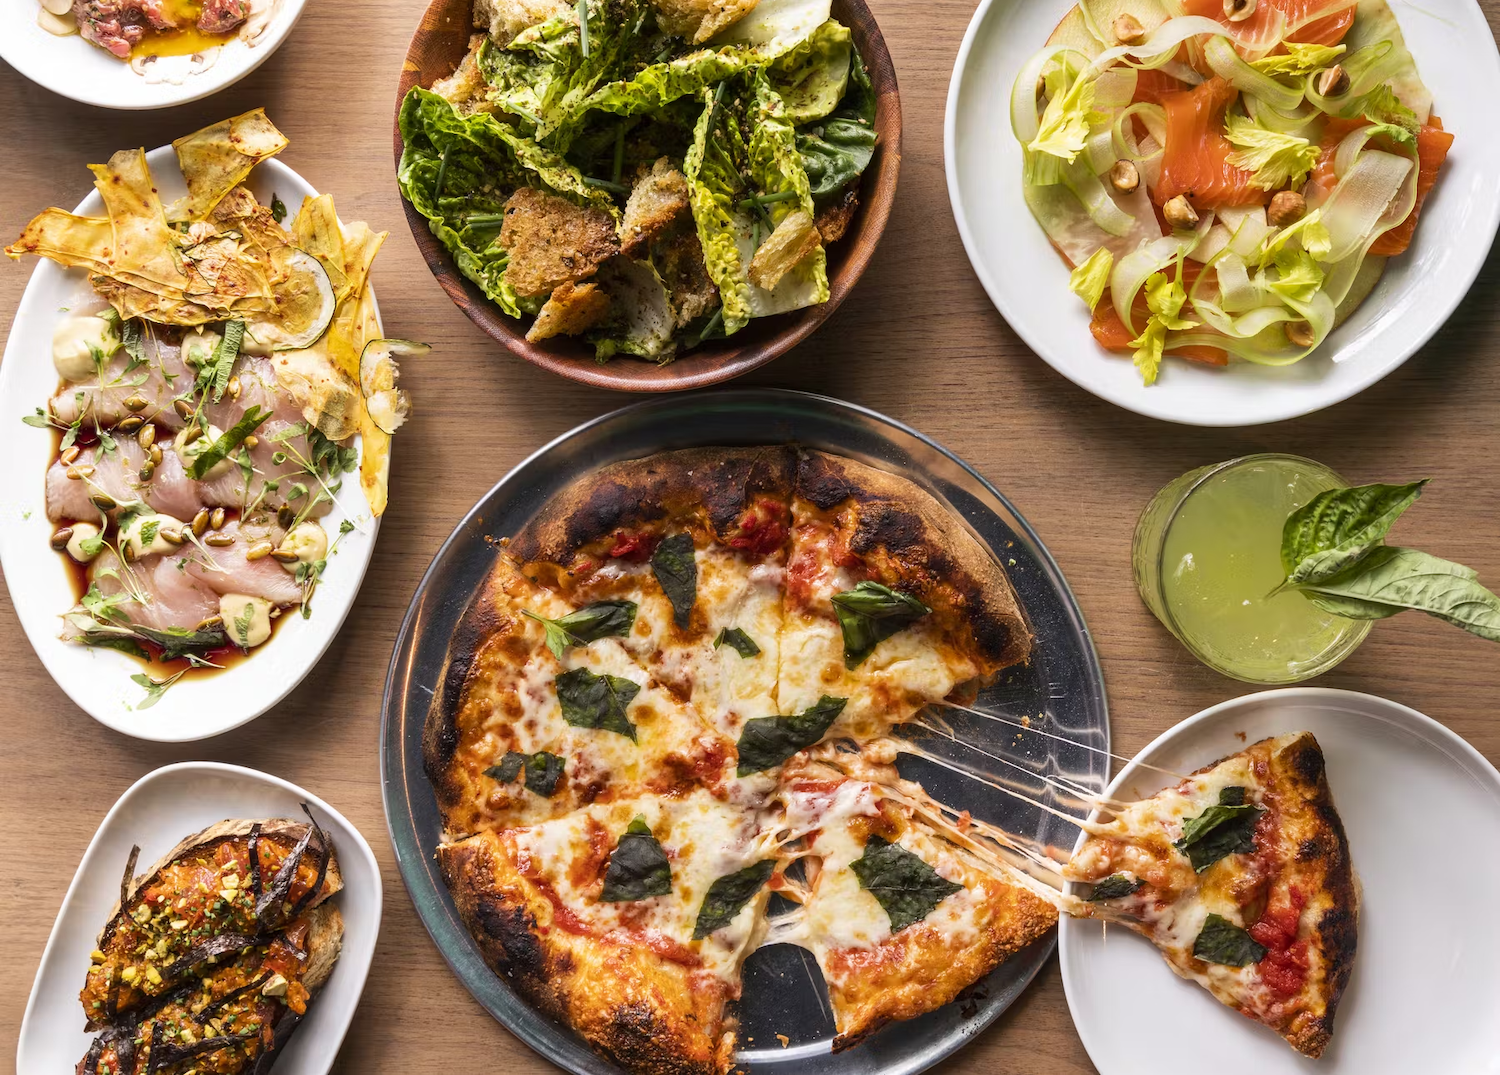 Spread of pizza and other dishes on a table